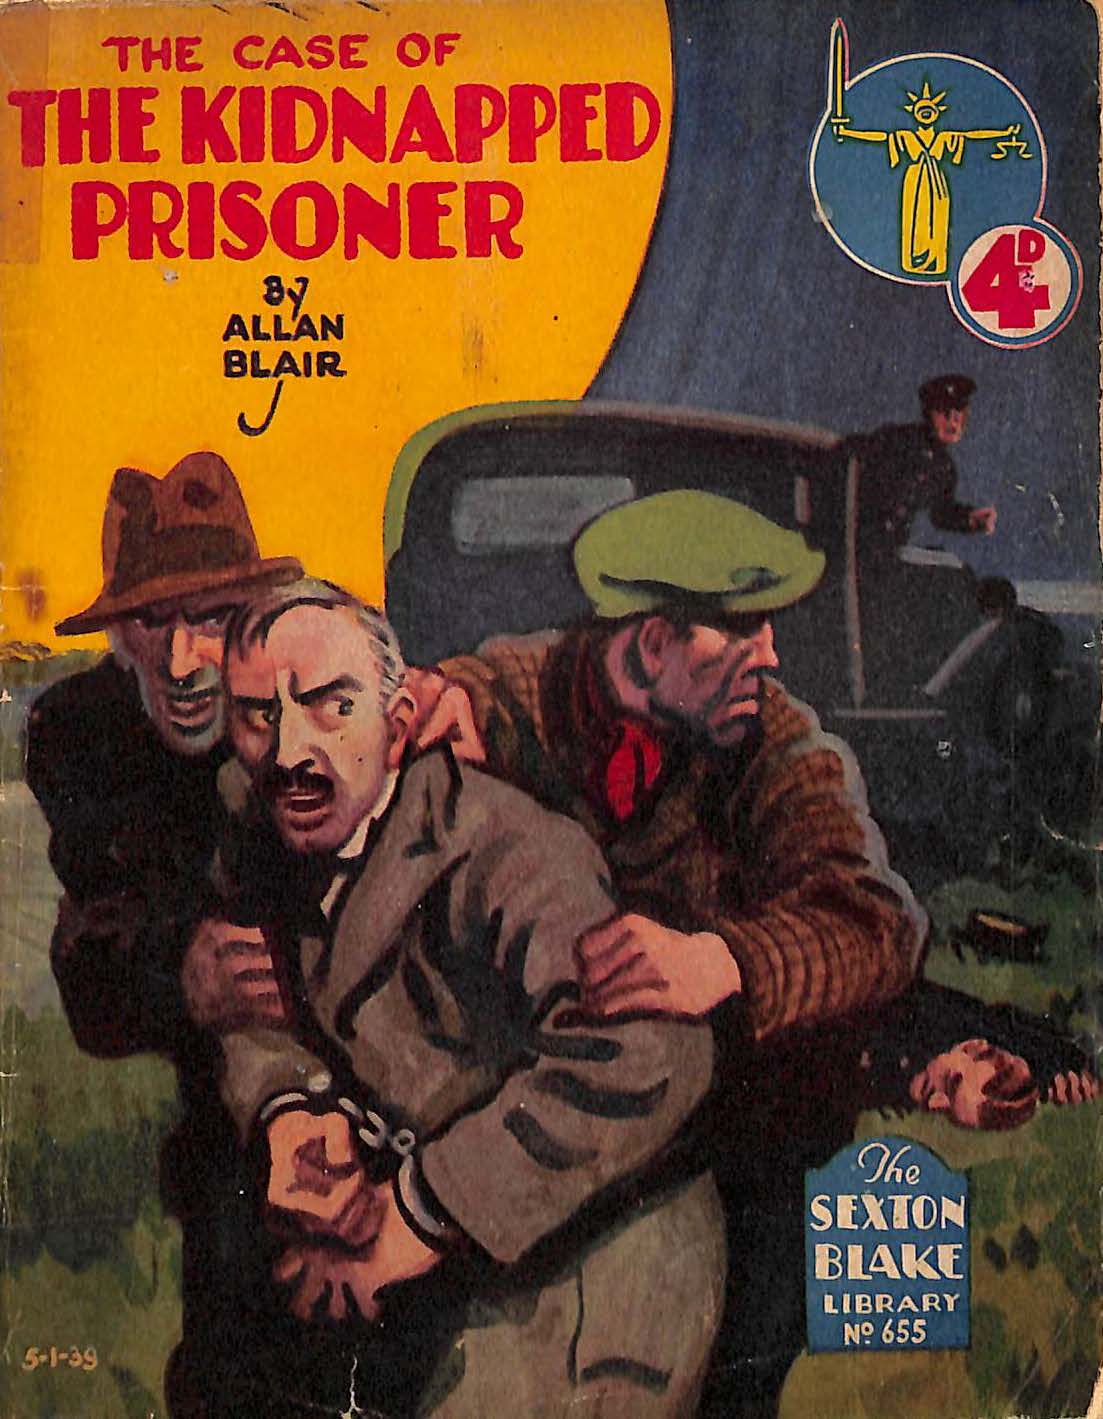 Book Cover For Sexton Blake Library S2 655 - The Case of the Kidnapped Prisoner